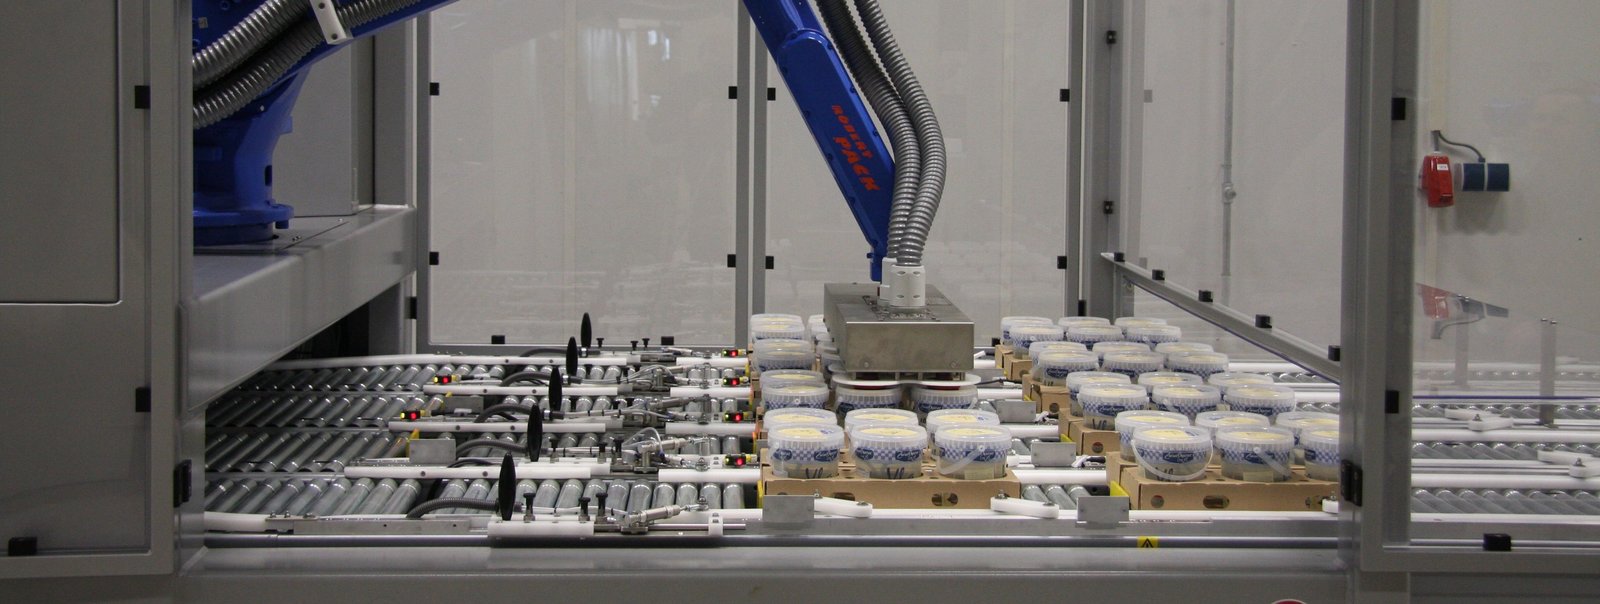 Robertpack-mix-robot-for-case-packing-buckets-with-yoghurt-Zuivelhoeve